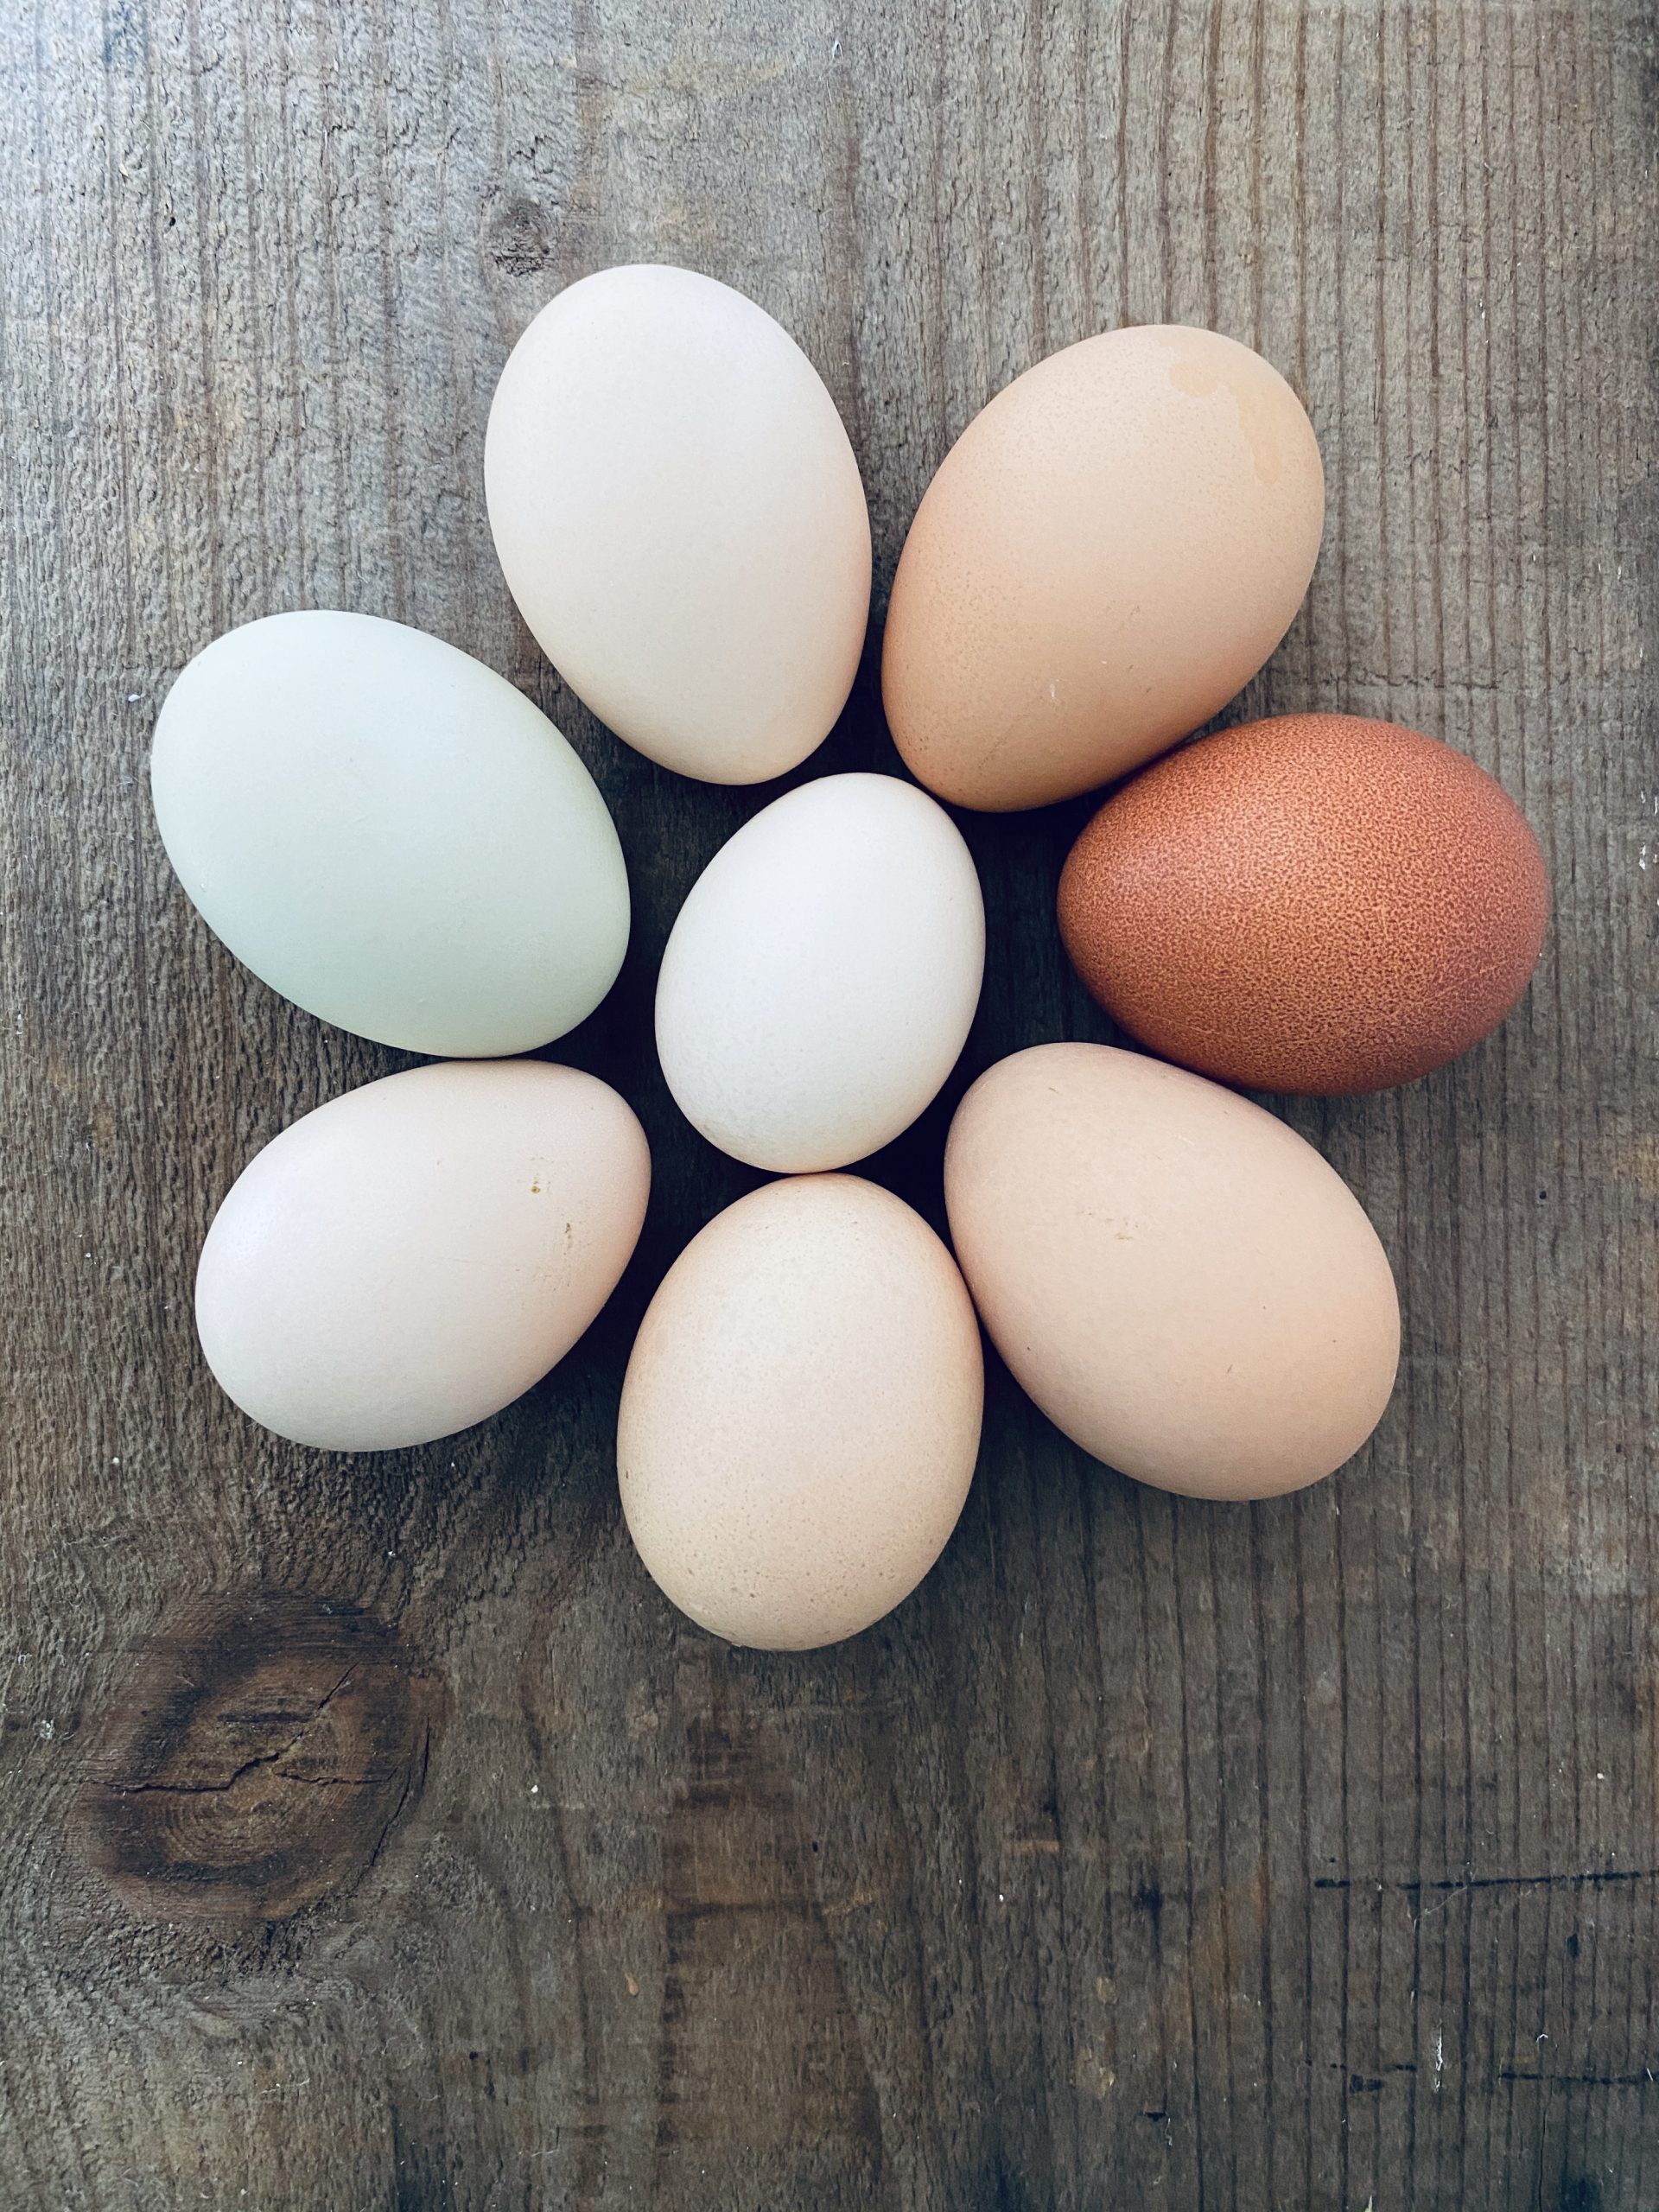 Best breeds for beautiful colorful eggs